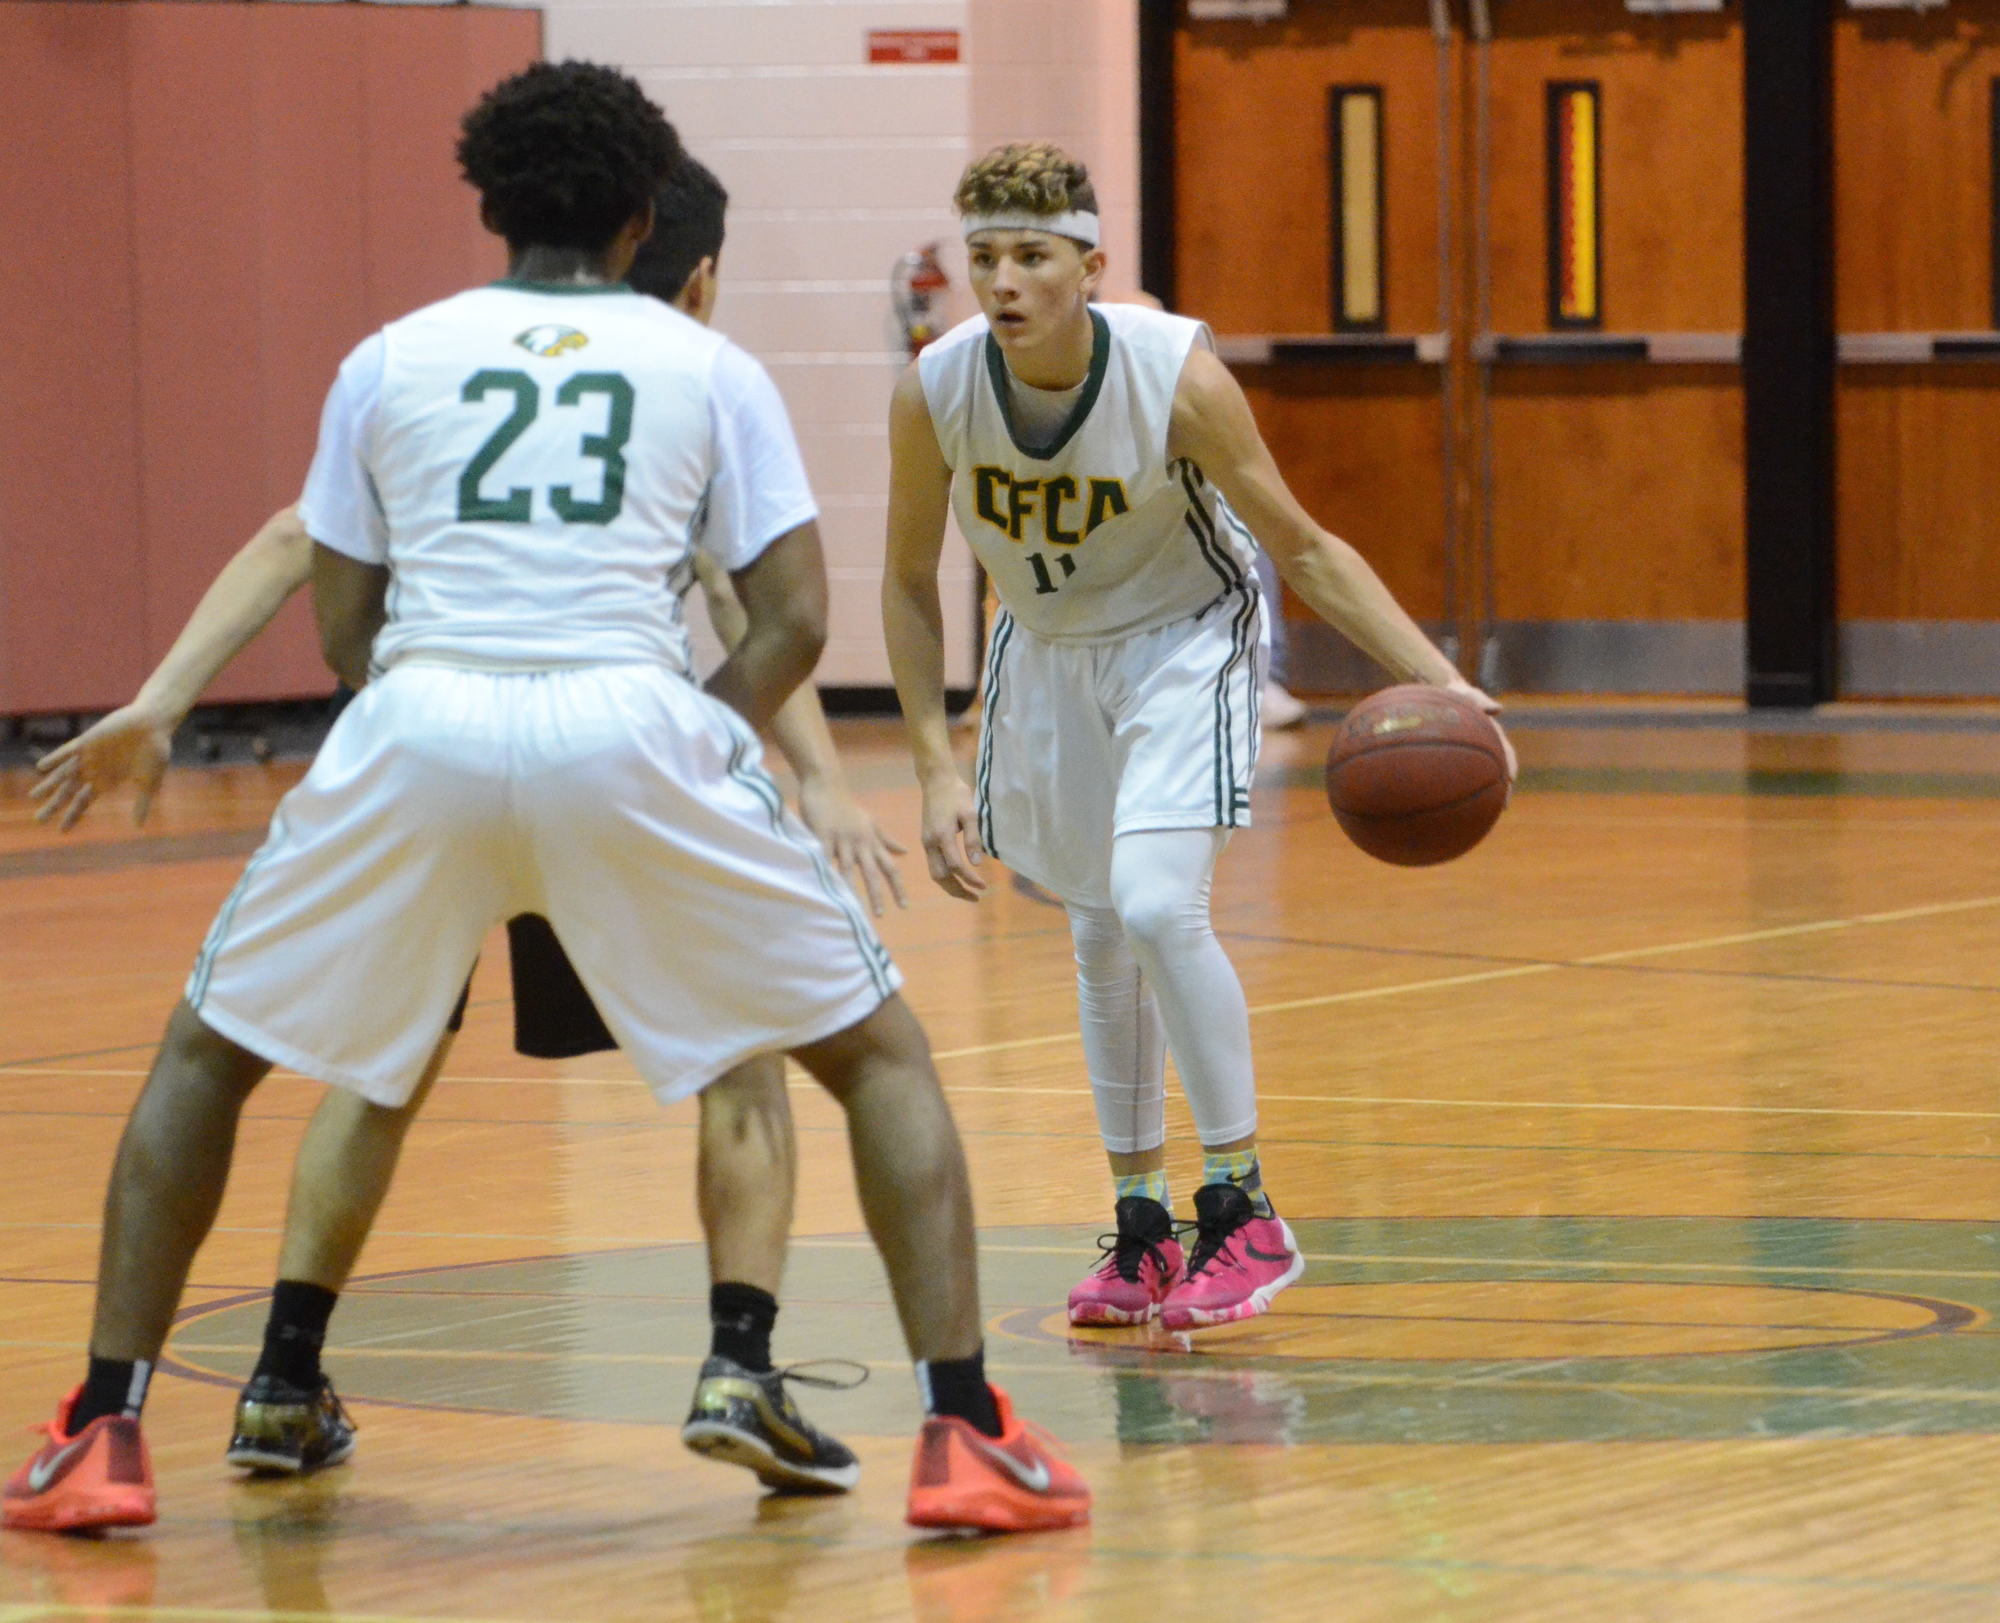 A game-winning basket by Dante Treacy sealed a district championship for CFCA — it's first since 1997.